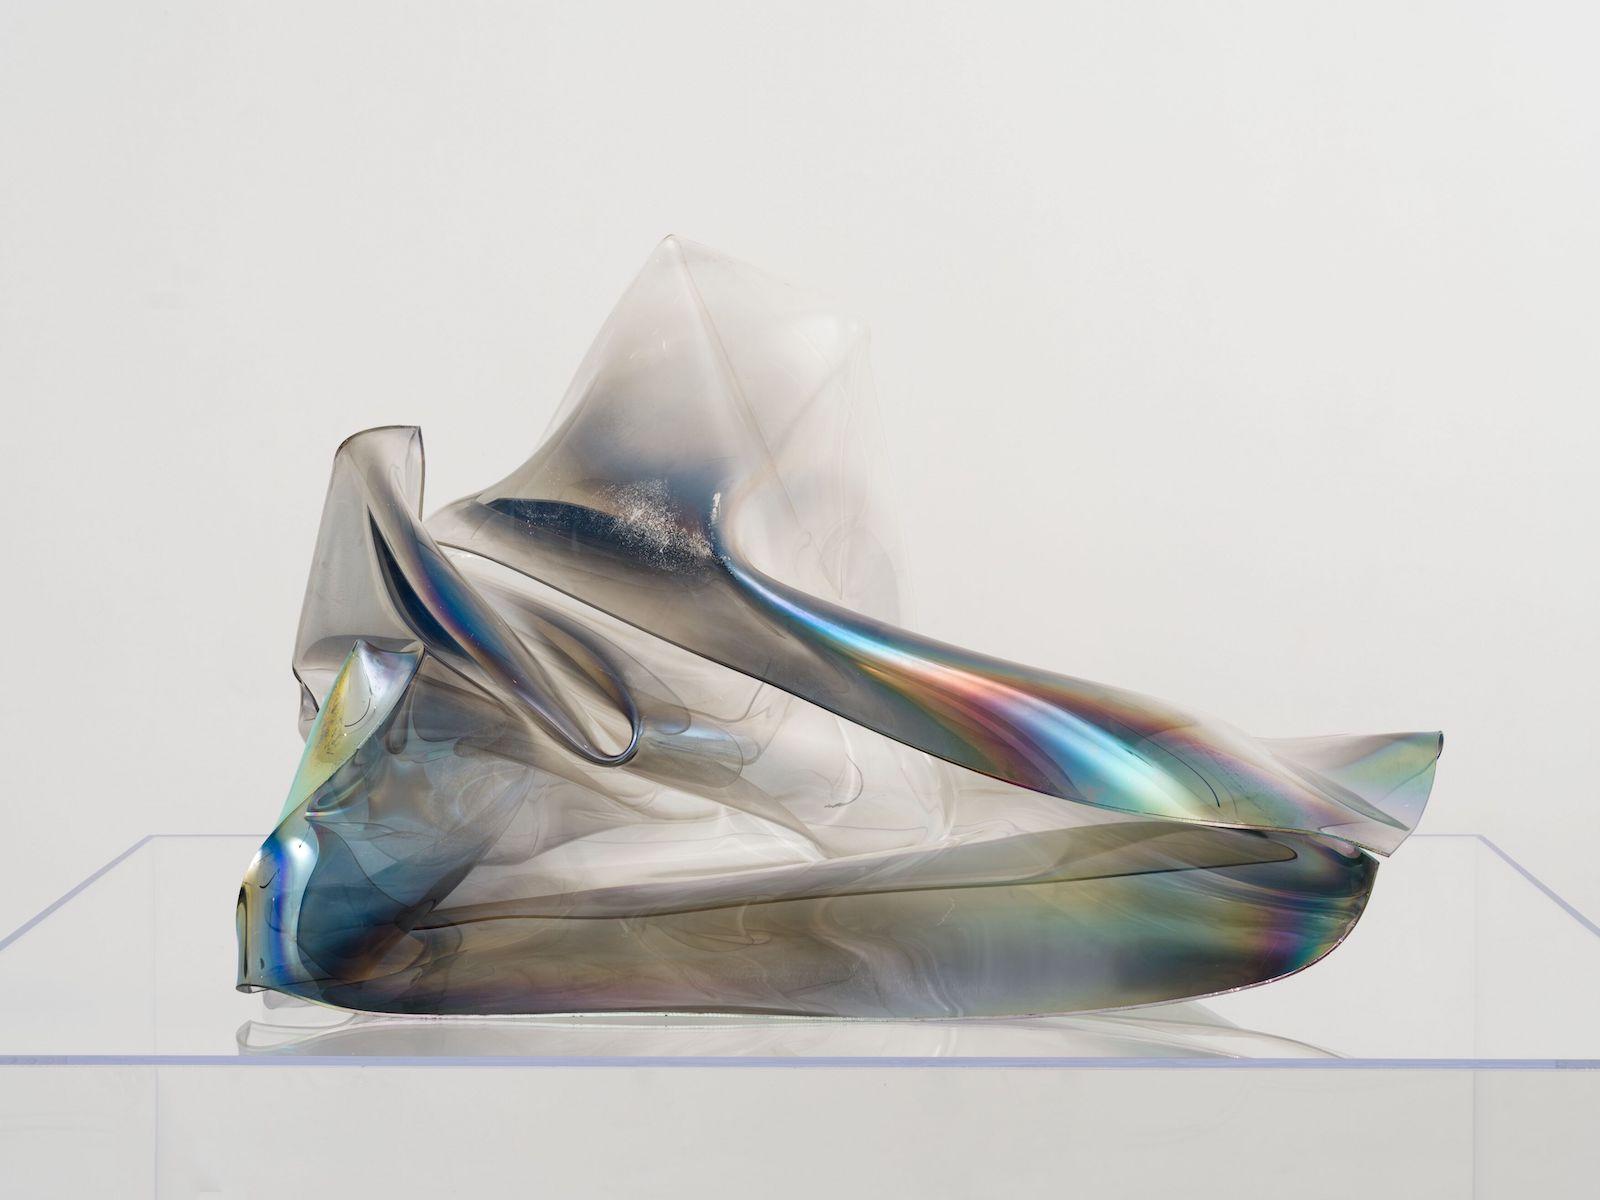 John Chamberlain Gallup, 1970. Mineral-coated synthetic polymer resin. 63.5 x 139.7 x 111.8 cm. (25 x 55 x 44 in.).© 2022 Fairweather & Fairweather LTD / Artists Rights Society (ARS), New York. Dia Art Foundation, New York.